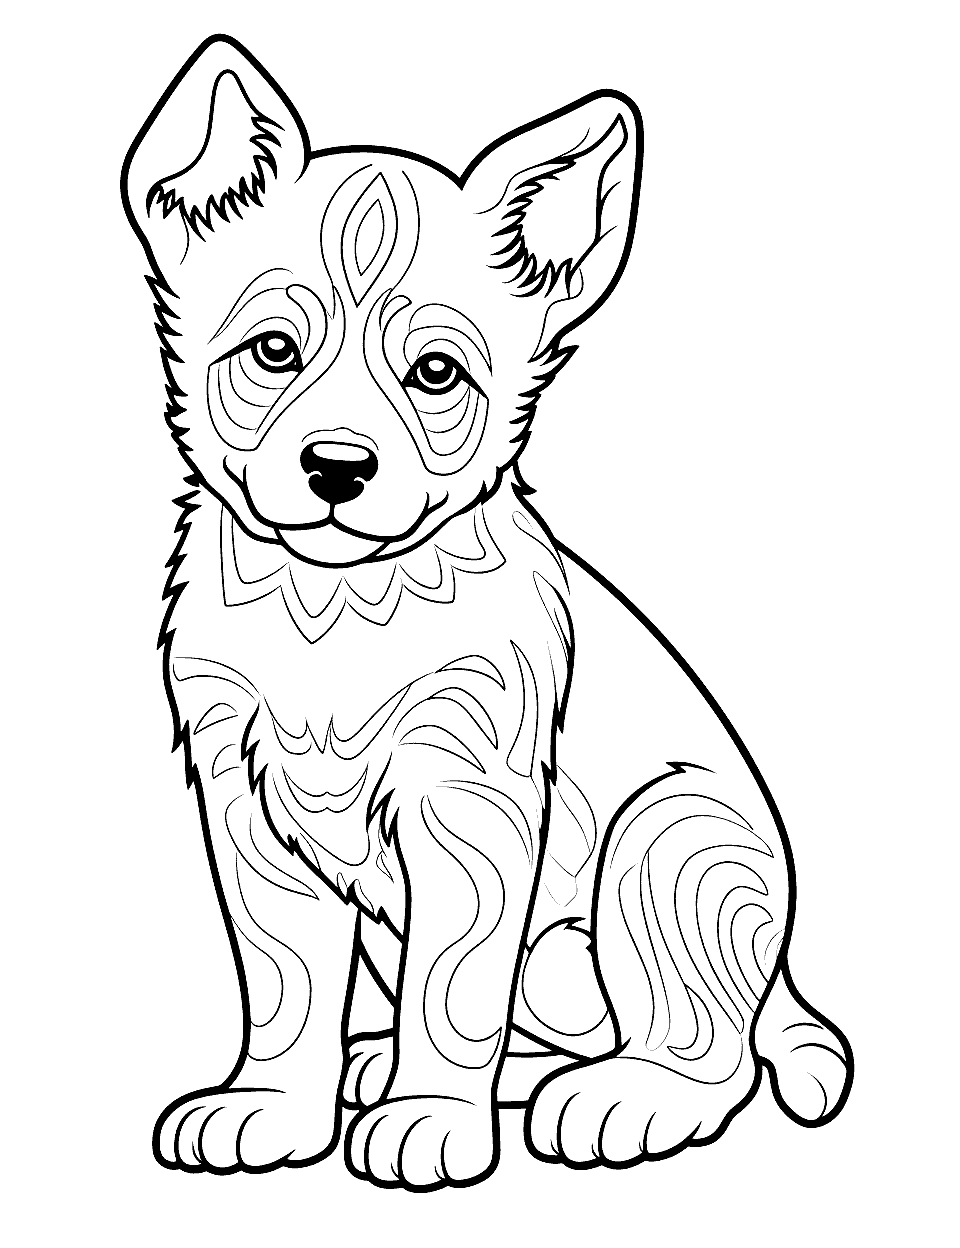 Detailed Design Intricate German Shepherd Puppy Coloring Page - A German Shepherd puppy with a highly detailed and intricate design, great for older kids who want a challenge.